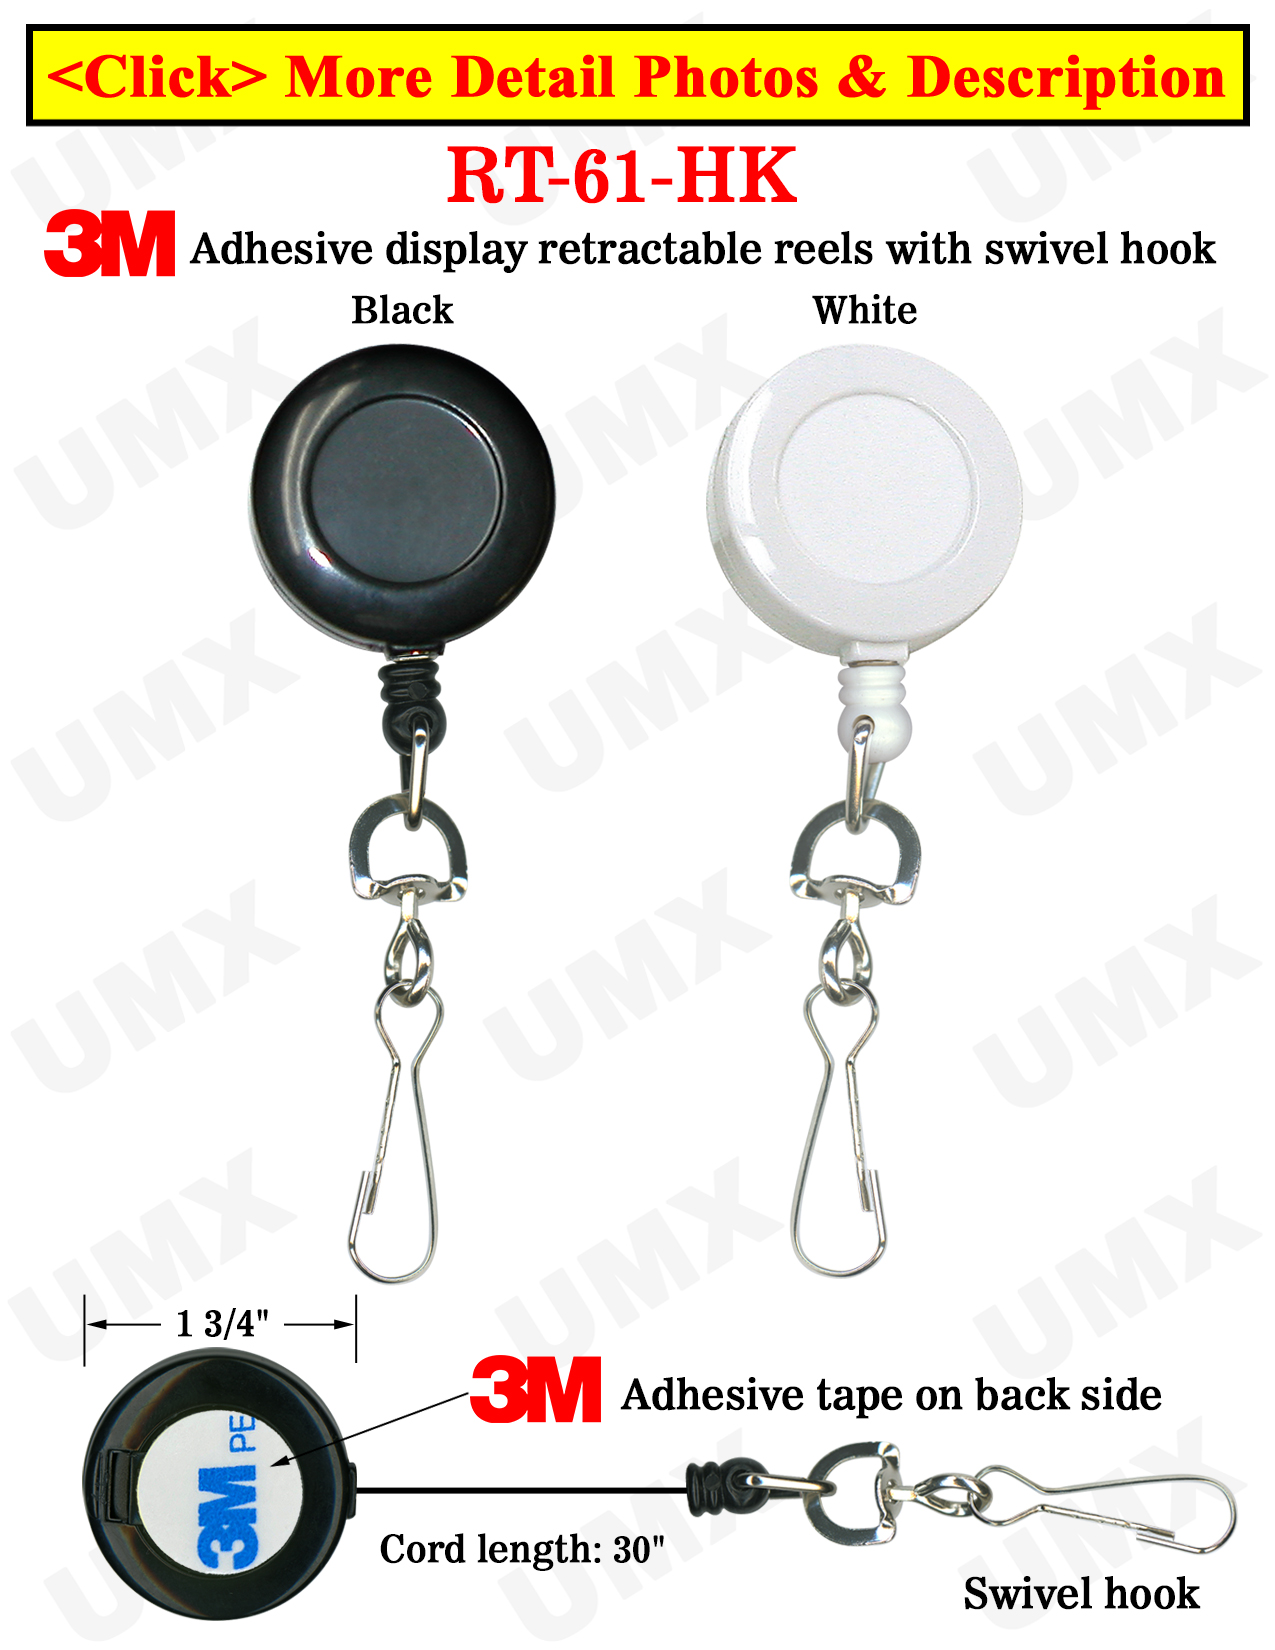 High Quality & Cheap Trade Show Display Retractable Trade Show Reels With Metal Swivel Hooks and Adhesive Backing